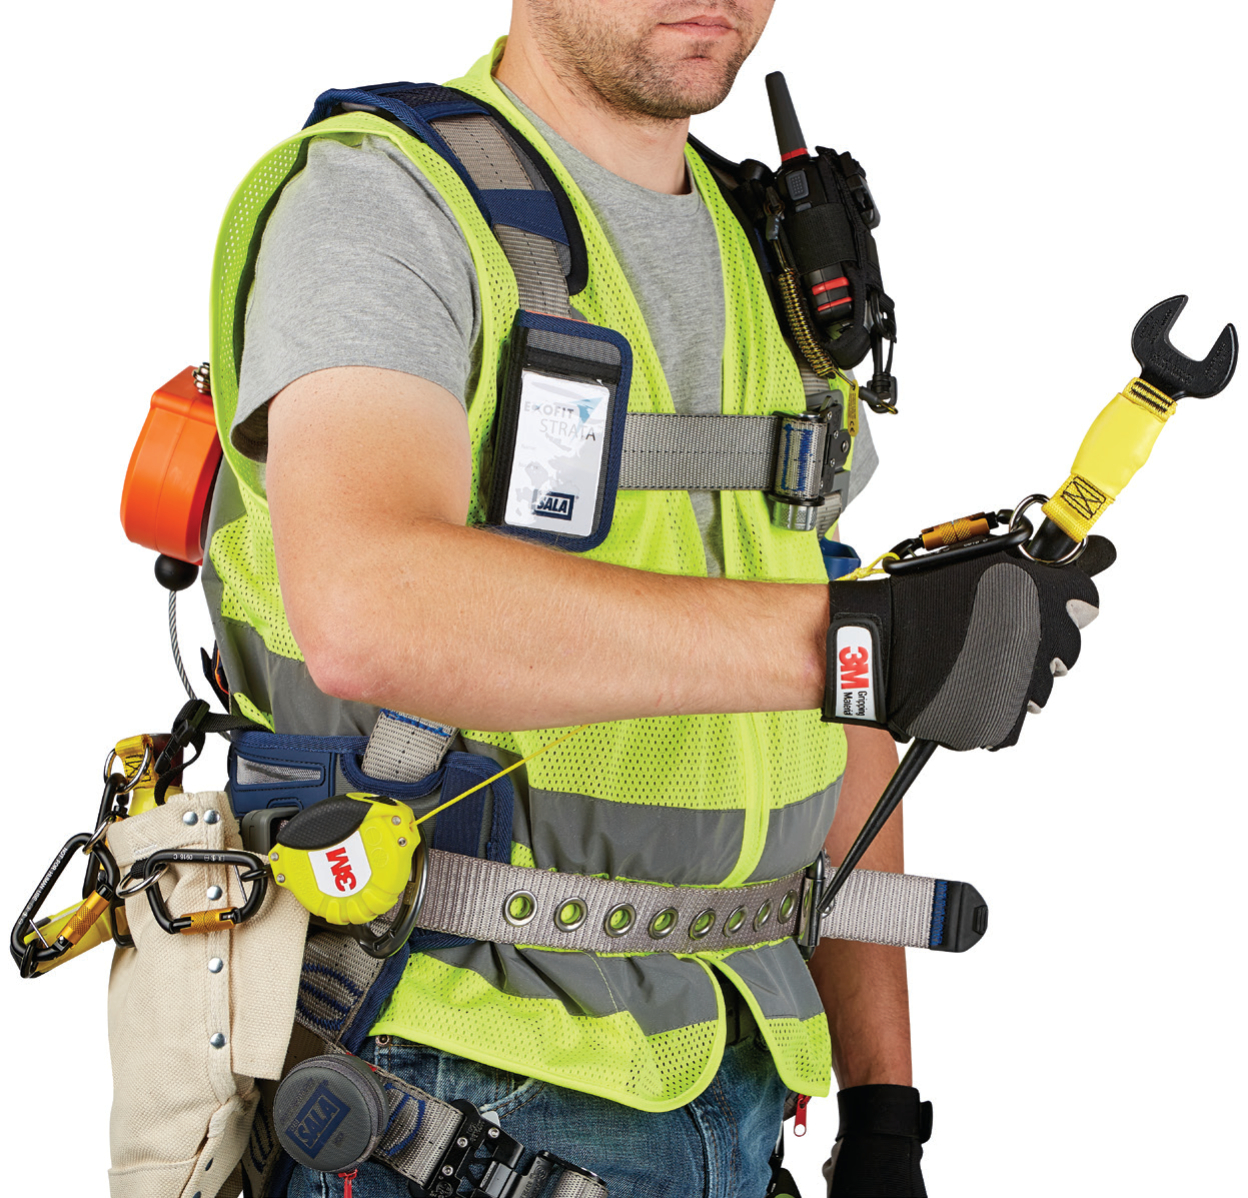 Blog - 3M Fall Protection for Tools - Common Attachment Points